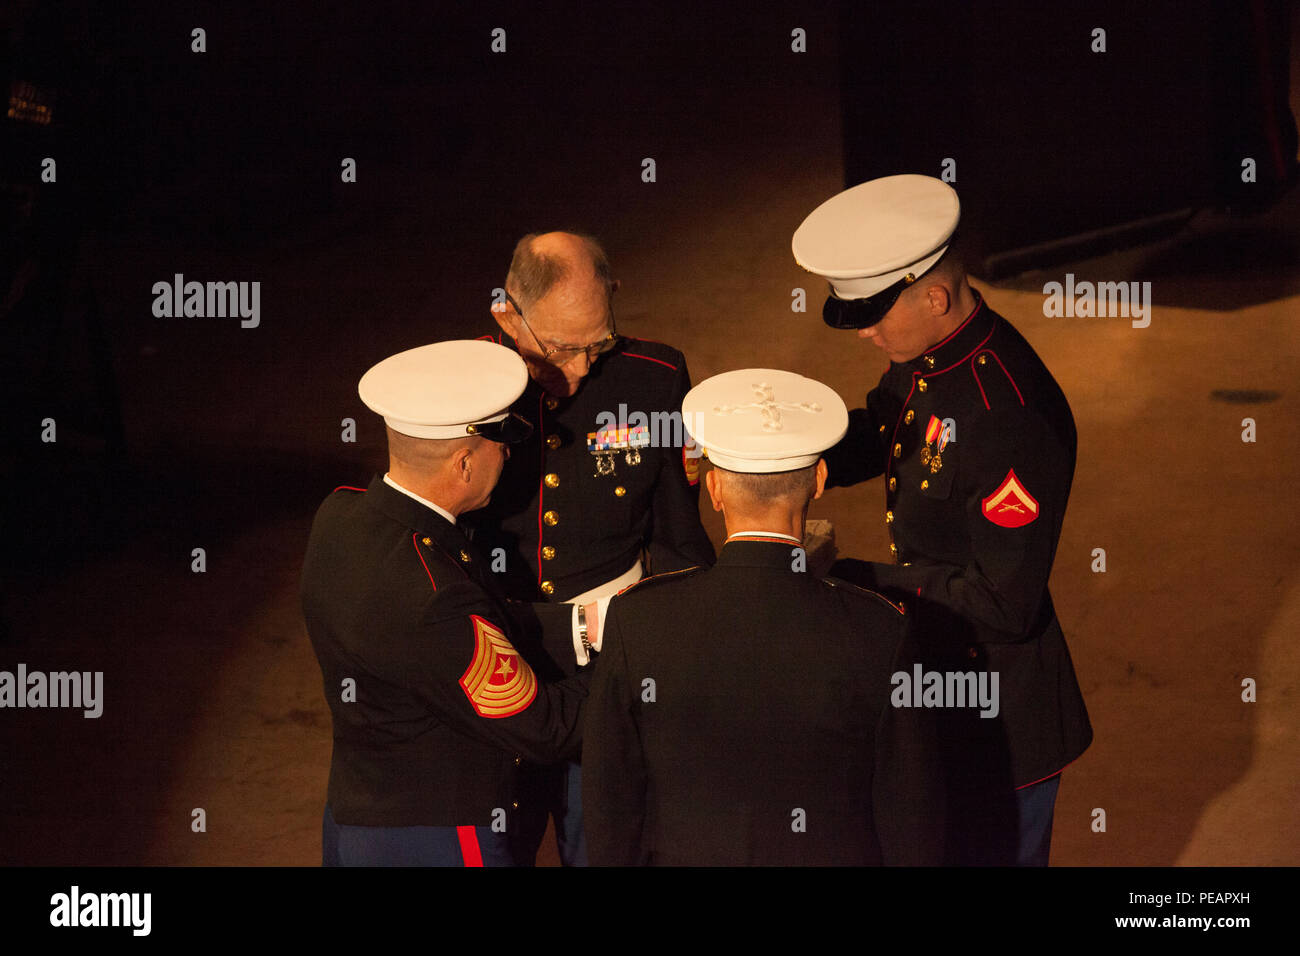 U.S. Marine Lt. Gen. Rex C. McMillian, Commander of Marine Forces Reserve and Marine Forces North, hands the first piece of cake to the oldest Marine in attendance, U.S. Marine GySgt. (Retired) Robert L. Allen, Infantryman, during the celebration of the 240th Marine Corps Birthday Ball at Mardi Gras World, New Orleans, La., Nov. 21, 2015. This year’s celebration honors those past, present, and future Marines throughout history and marks the 240th Marine Corps Birthday since its founding on Nov. 10, 1775. (U.S. Marine Corps photo by Kimberly Aguirre/Released) Stock Photo